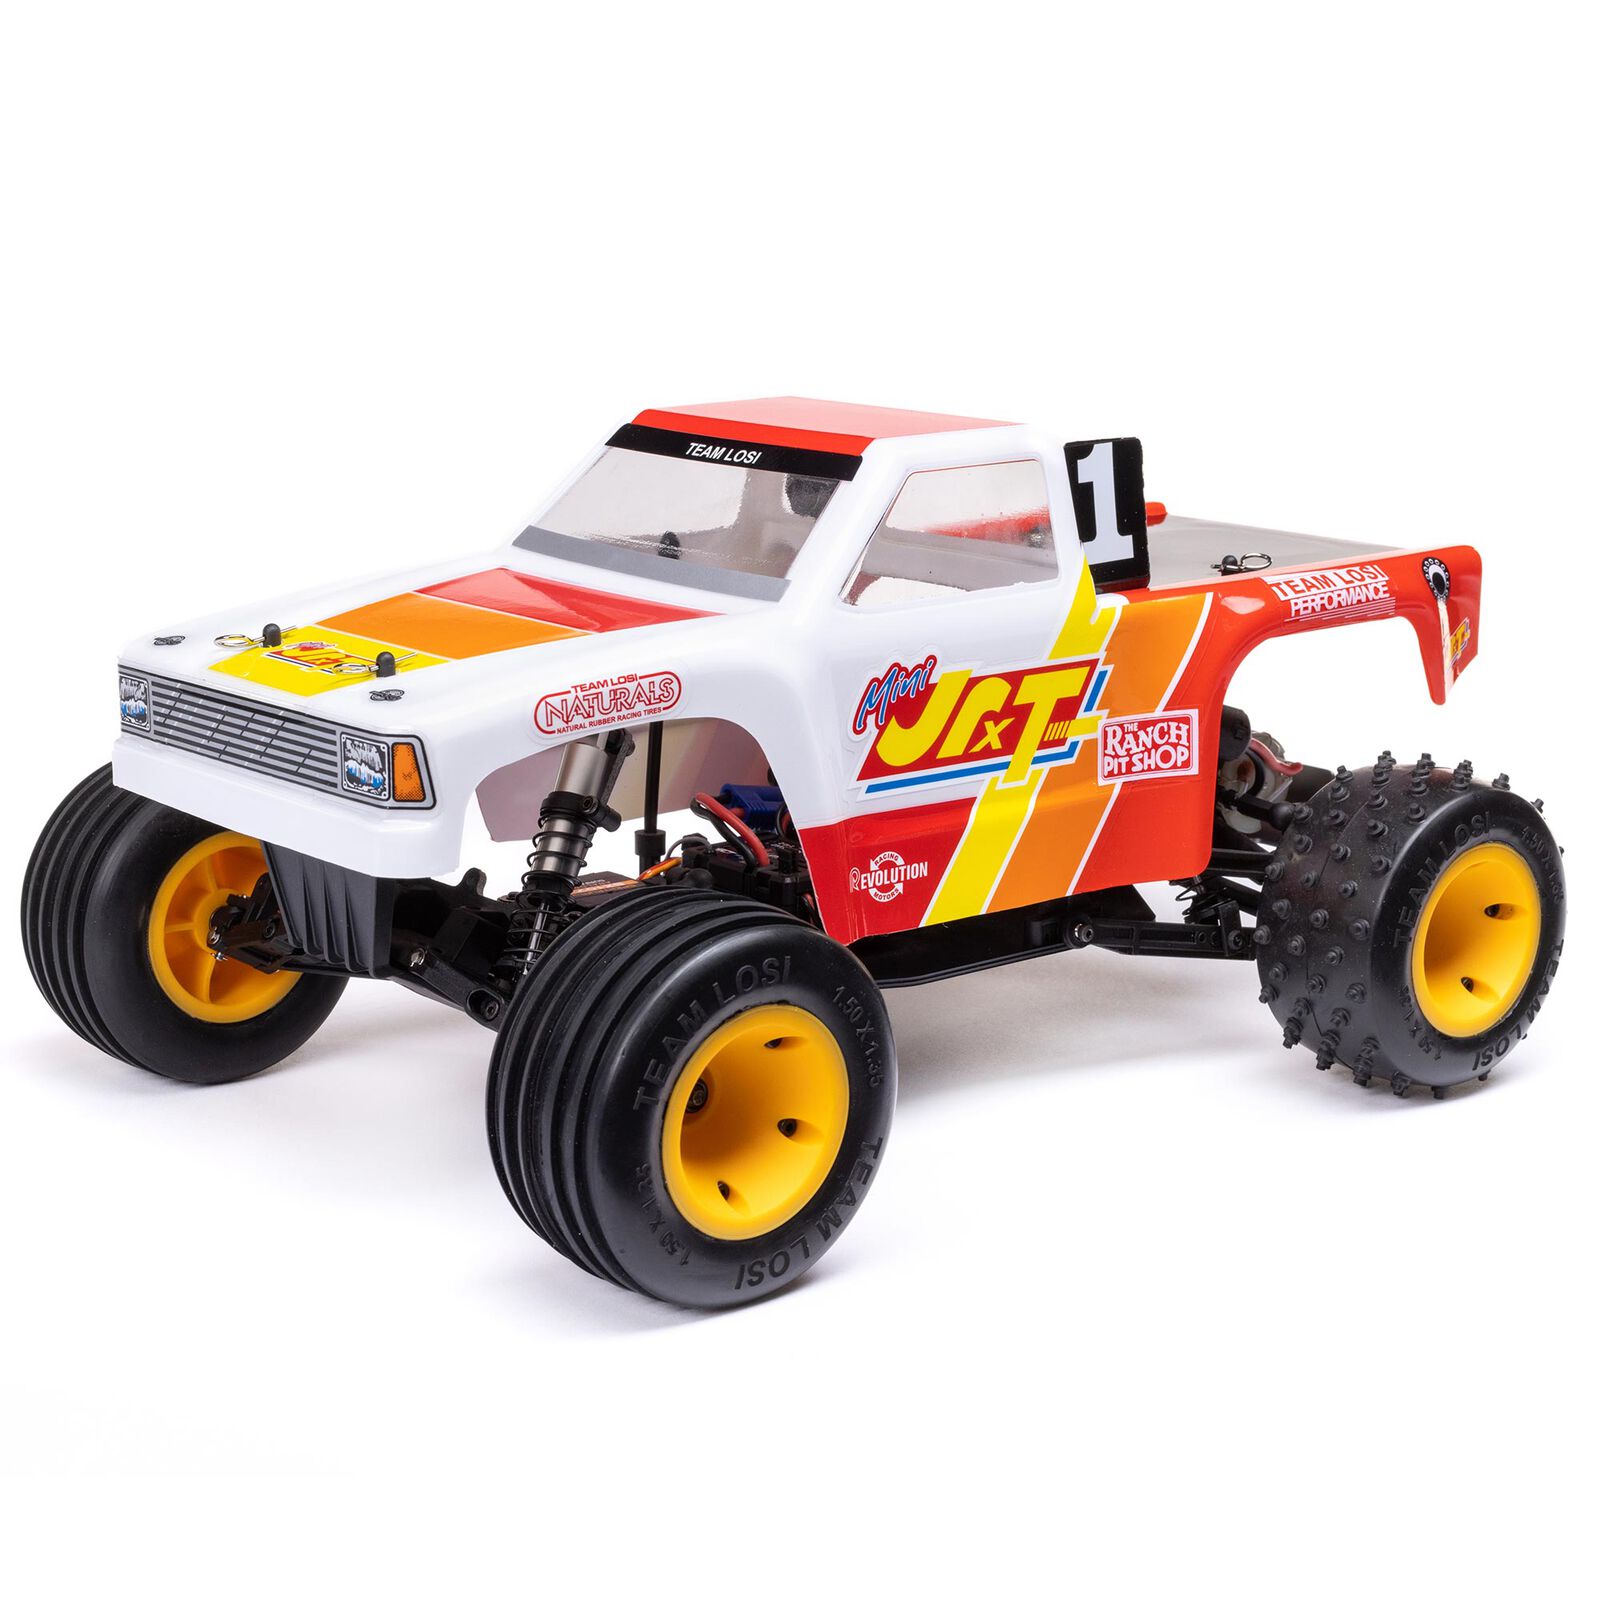 Losi LOS01021 - 1/16 Mini JRXT Brushed 2WD Limited Edition Racing Monster Truck RTR